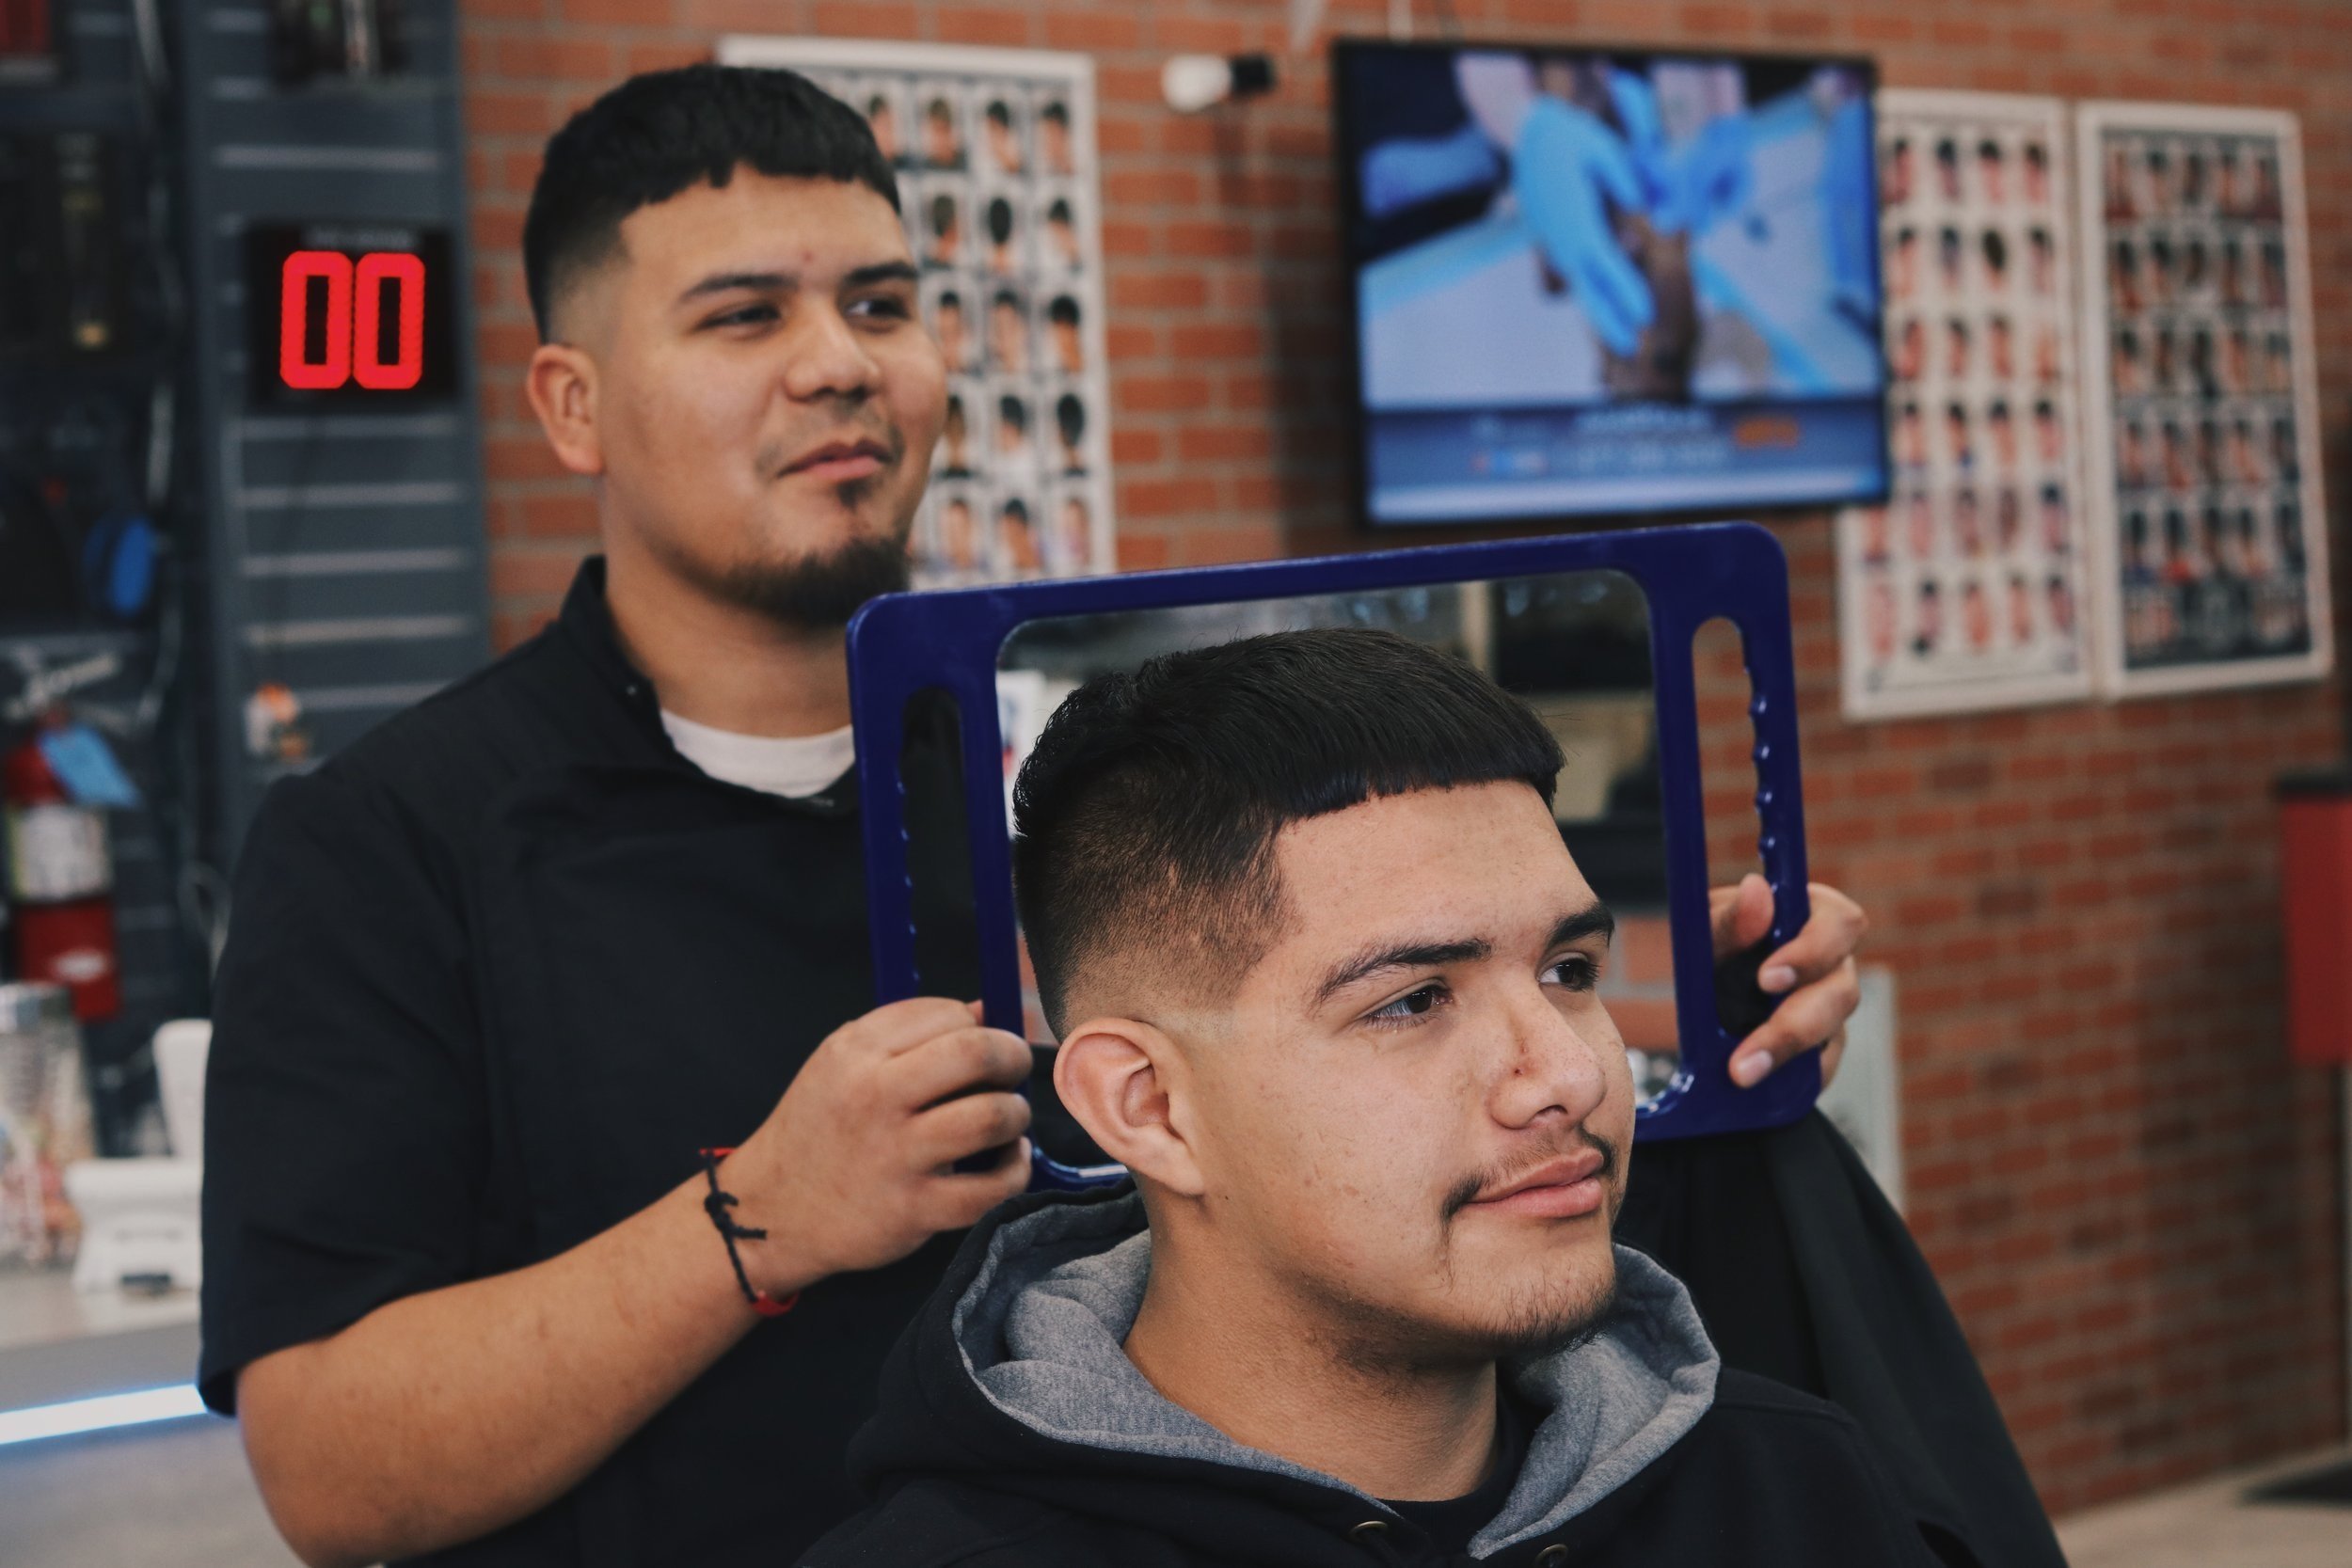 Barbershop near me: How To Find The Best Places?, by BlackBarber-Shop.com